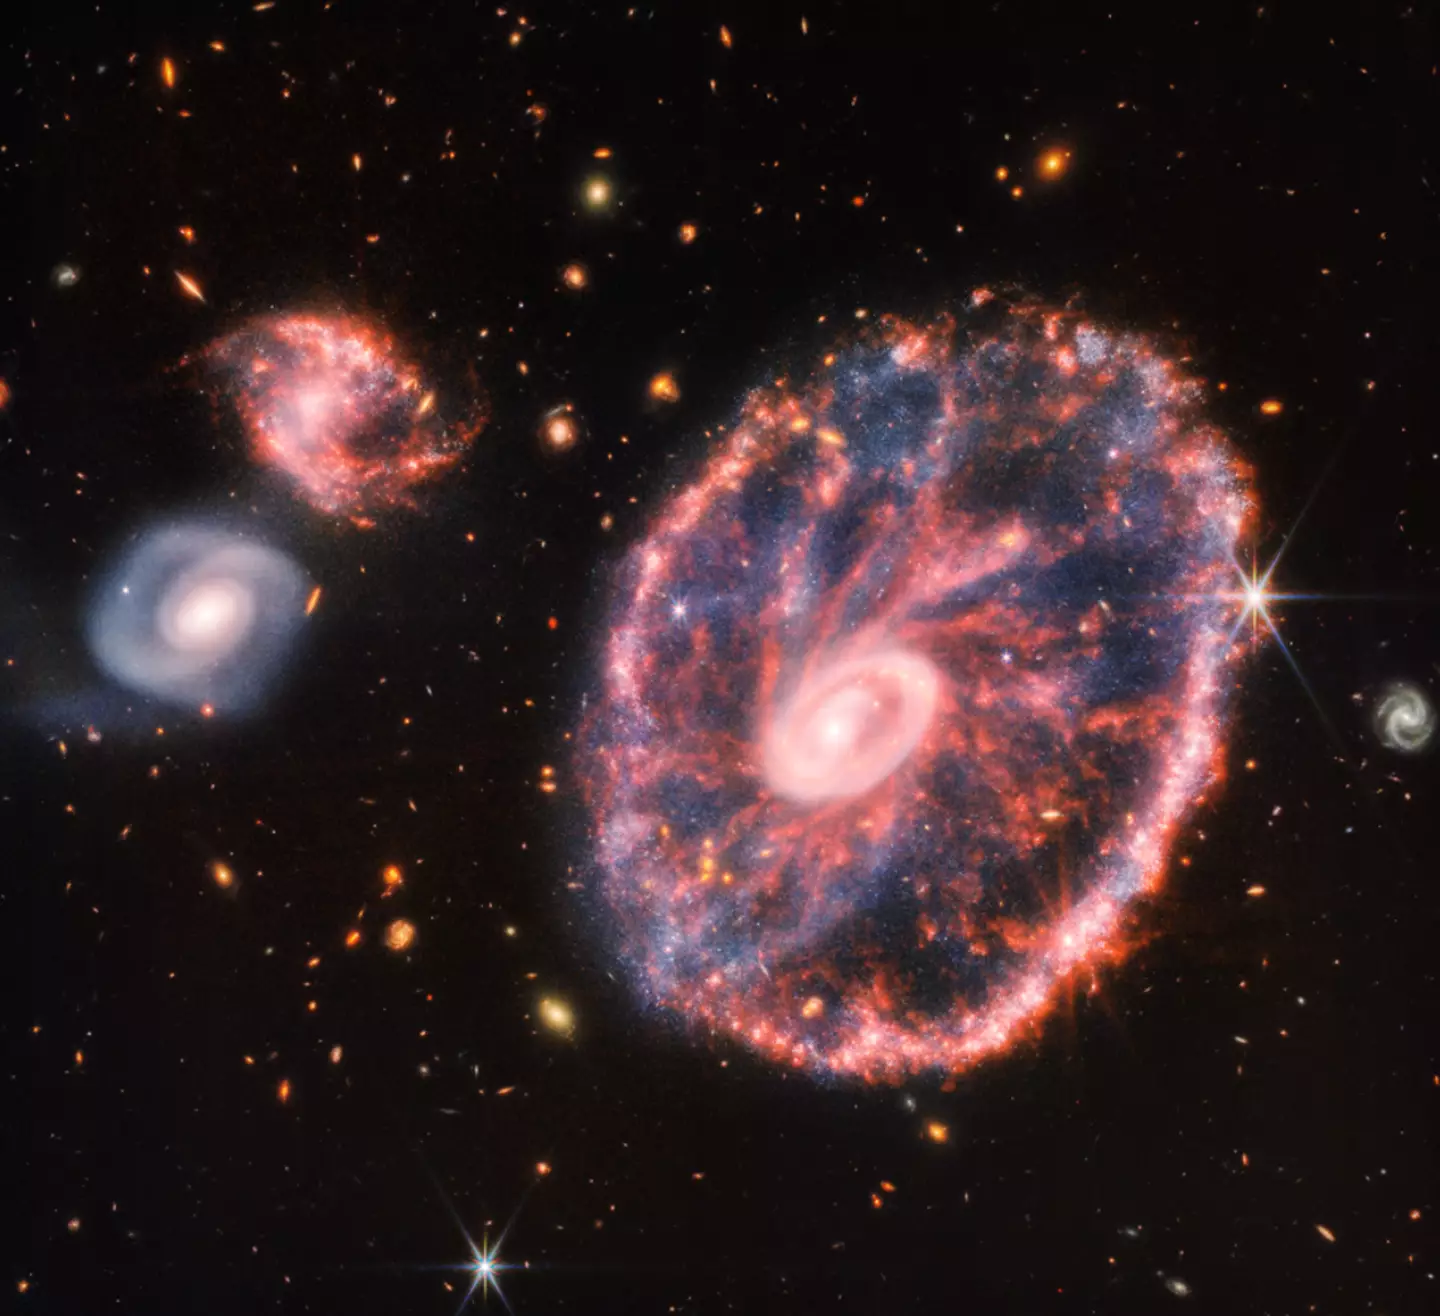 The cartwheel galaxy is prettier than we could've imagined.